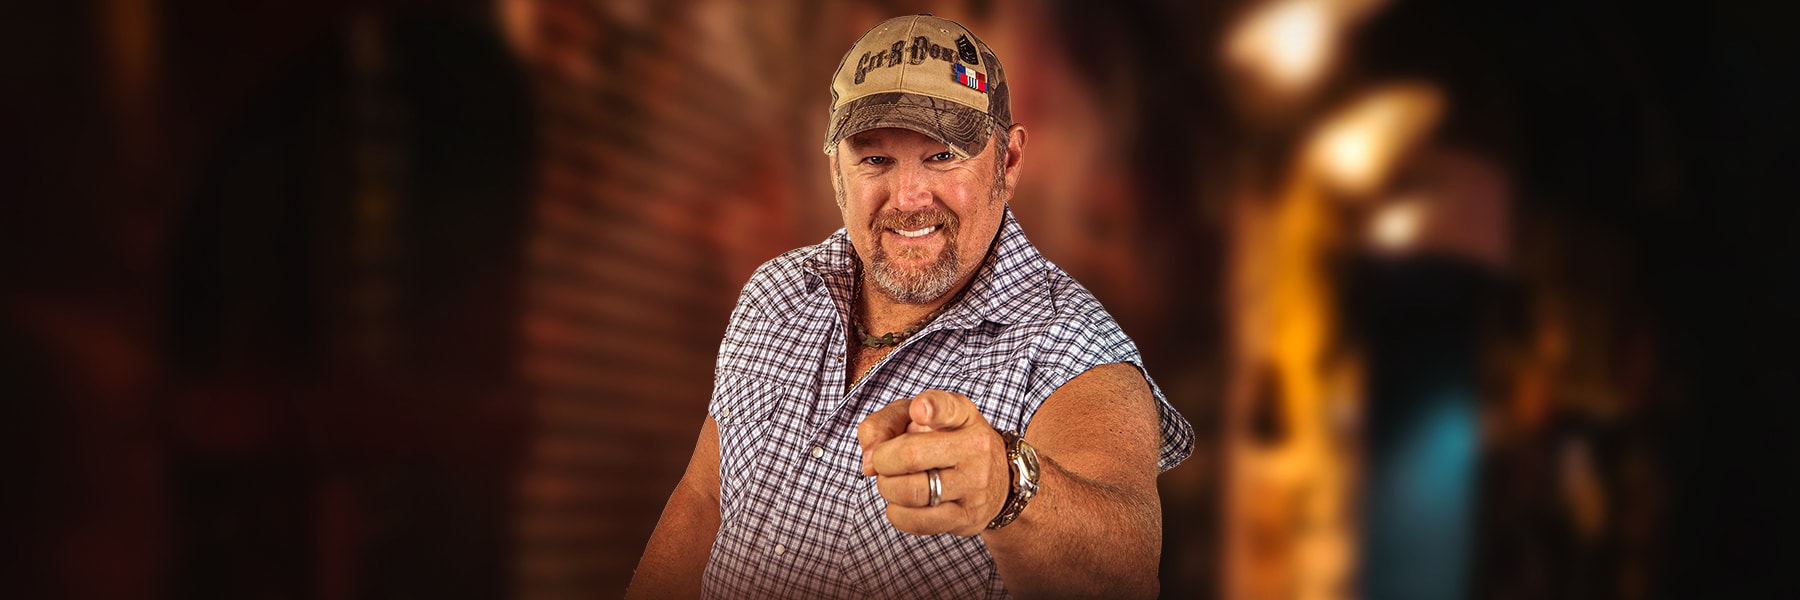 LARRY THE CABLE GUY